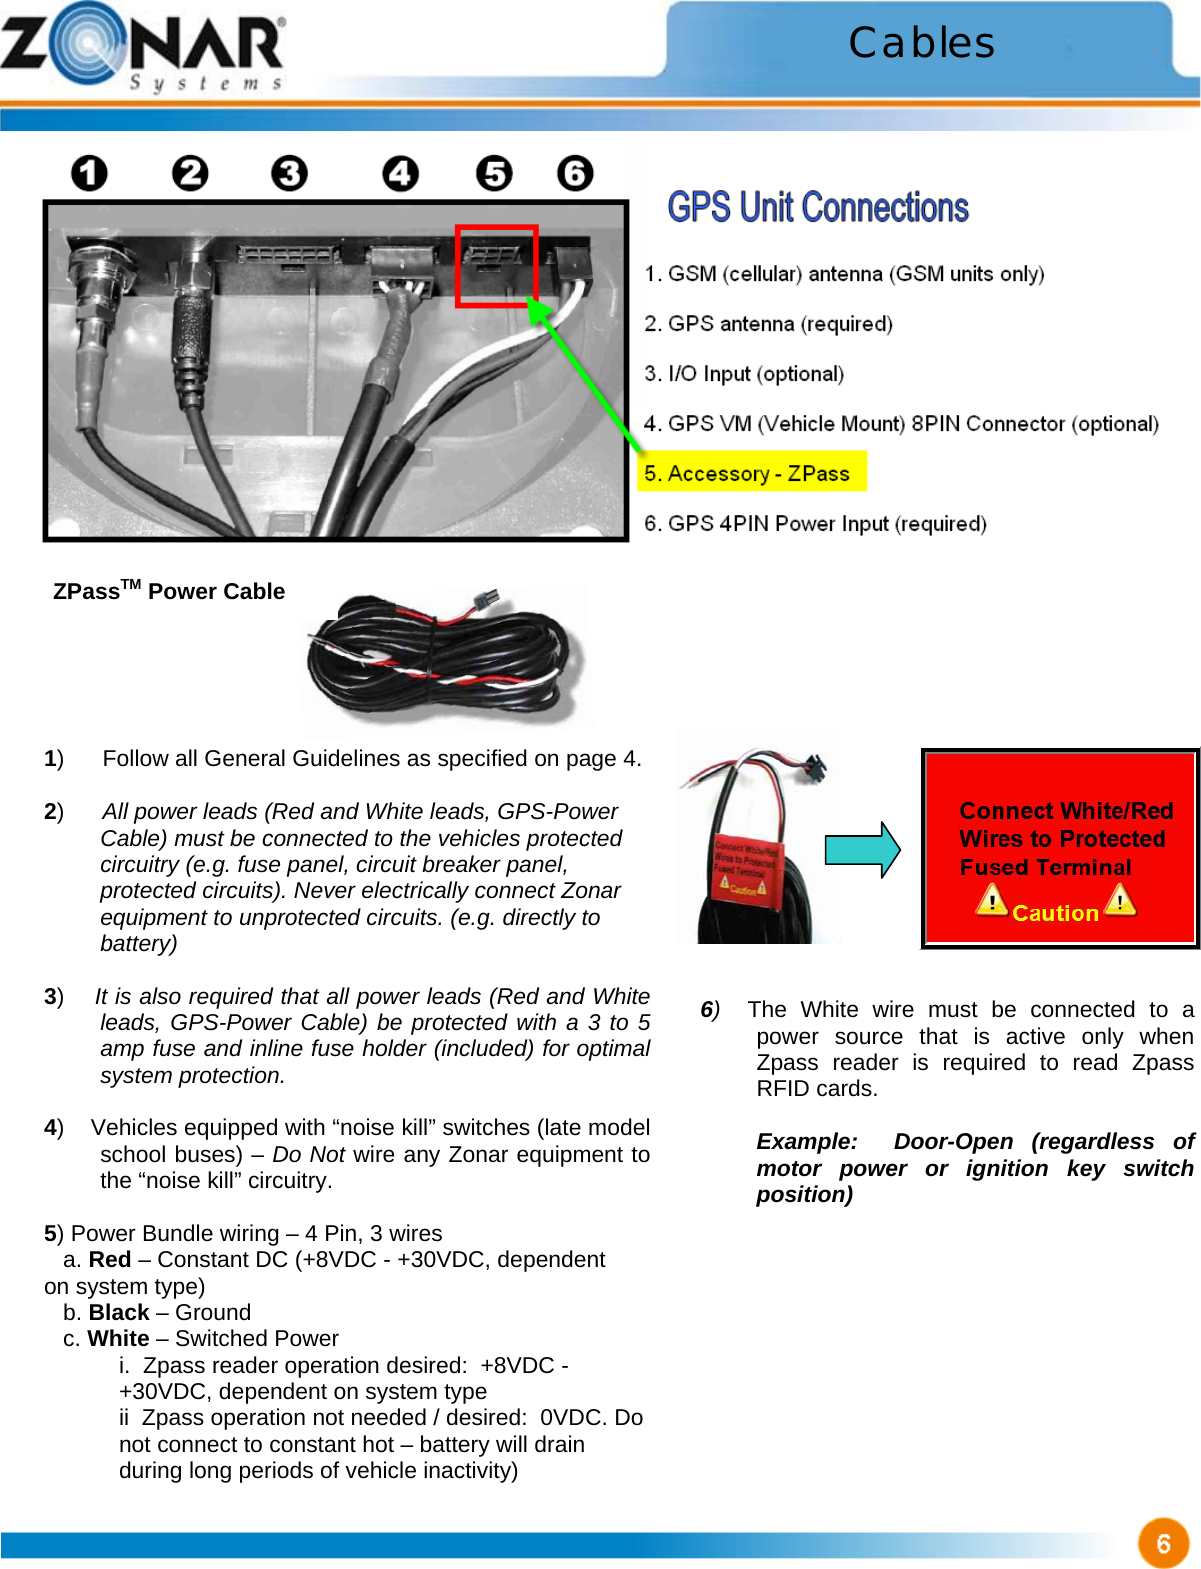                             6)  The White wire must be connected to a power source that is active only when Zpass reader is required to read Zpass RFID cards.    Example:  Door-Open (regardless of motor power or ignition key switch position)  Cables ZPassTM Power Cable 1)      Follow all General Guidelines as specified on page 4.  2)      All power leads (Red and White leads, GPS-Power  Cable) must be connected to the vehicles protected circuitry (e.g. fuse panel, circuit breaker panel, protected circuits). Never electrically connect Zonar equipment to unprotected circuits. (e.g. directly to battery)  3)    It is also required that all power leads (Red and White leads, GPS-Power Cable) be protected with a 3 to 5 amp fuse and inline fuse holder (included) for optimal system protection.  4)    Vehicles equipped with “noise kill” switches (late model school buses) – Do Not wire any Zonar equipment to the “noise kill” circuitry.  5) Power Bundle wiring – 4 Pin, 3 wires    a. Red – Constant DC (+8VDC - +30VDC, dependent         on system type)    b. Black – Ground    c. White – Switched Power i.  Zpass reader operation desired:  +8VDC - +30VDC, dependent on system type ii  Zpass operation not needed / desired:  0VDC. Do not connect to constant hot – battery will drain during long periods of vehicle inactivity) 